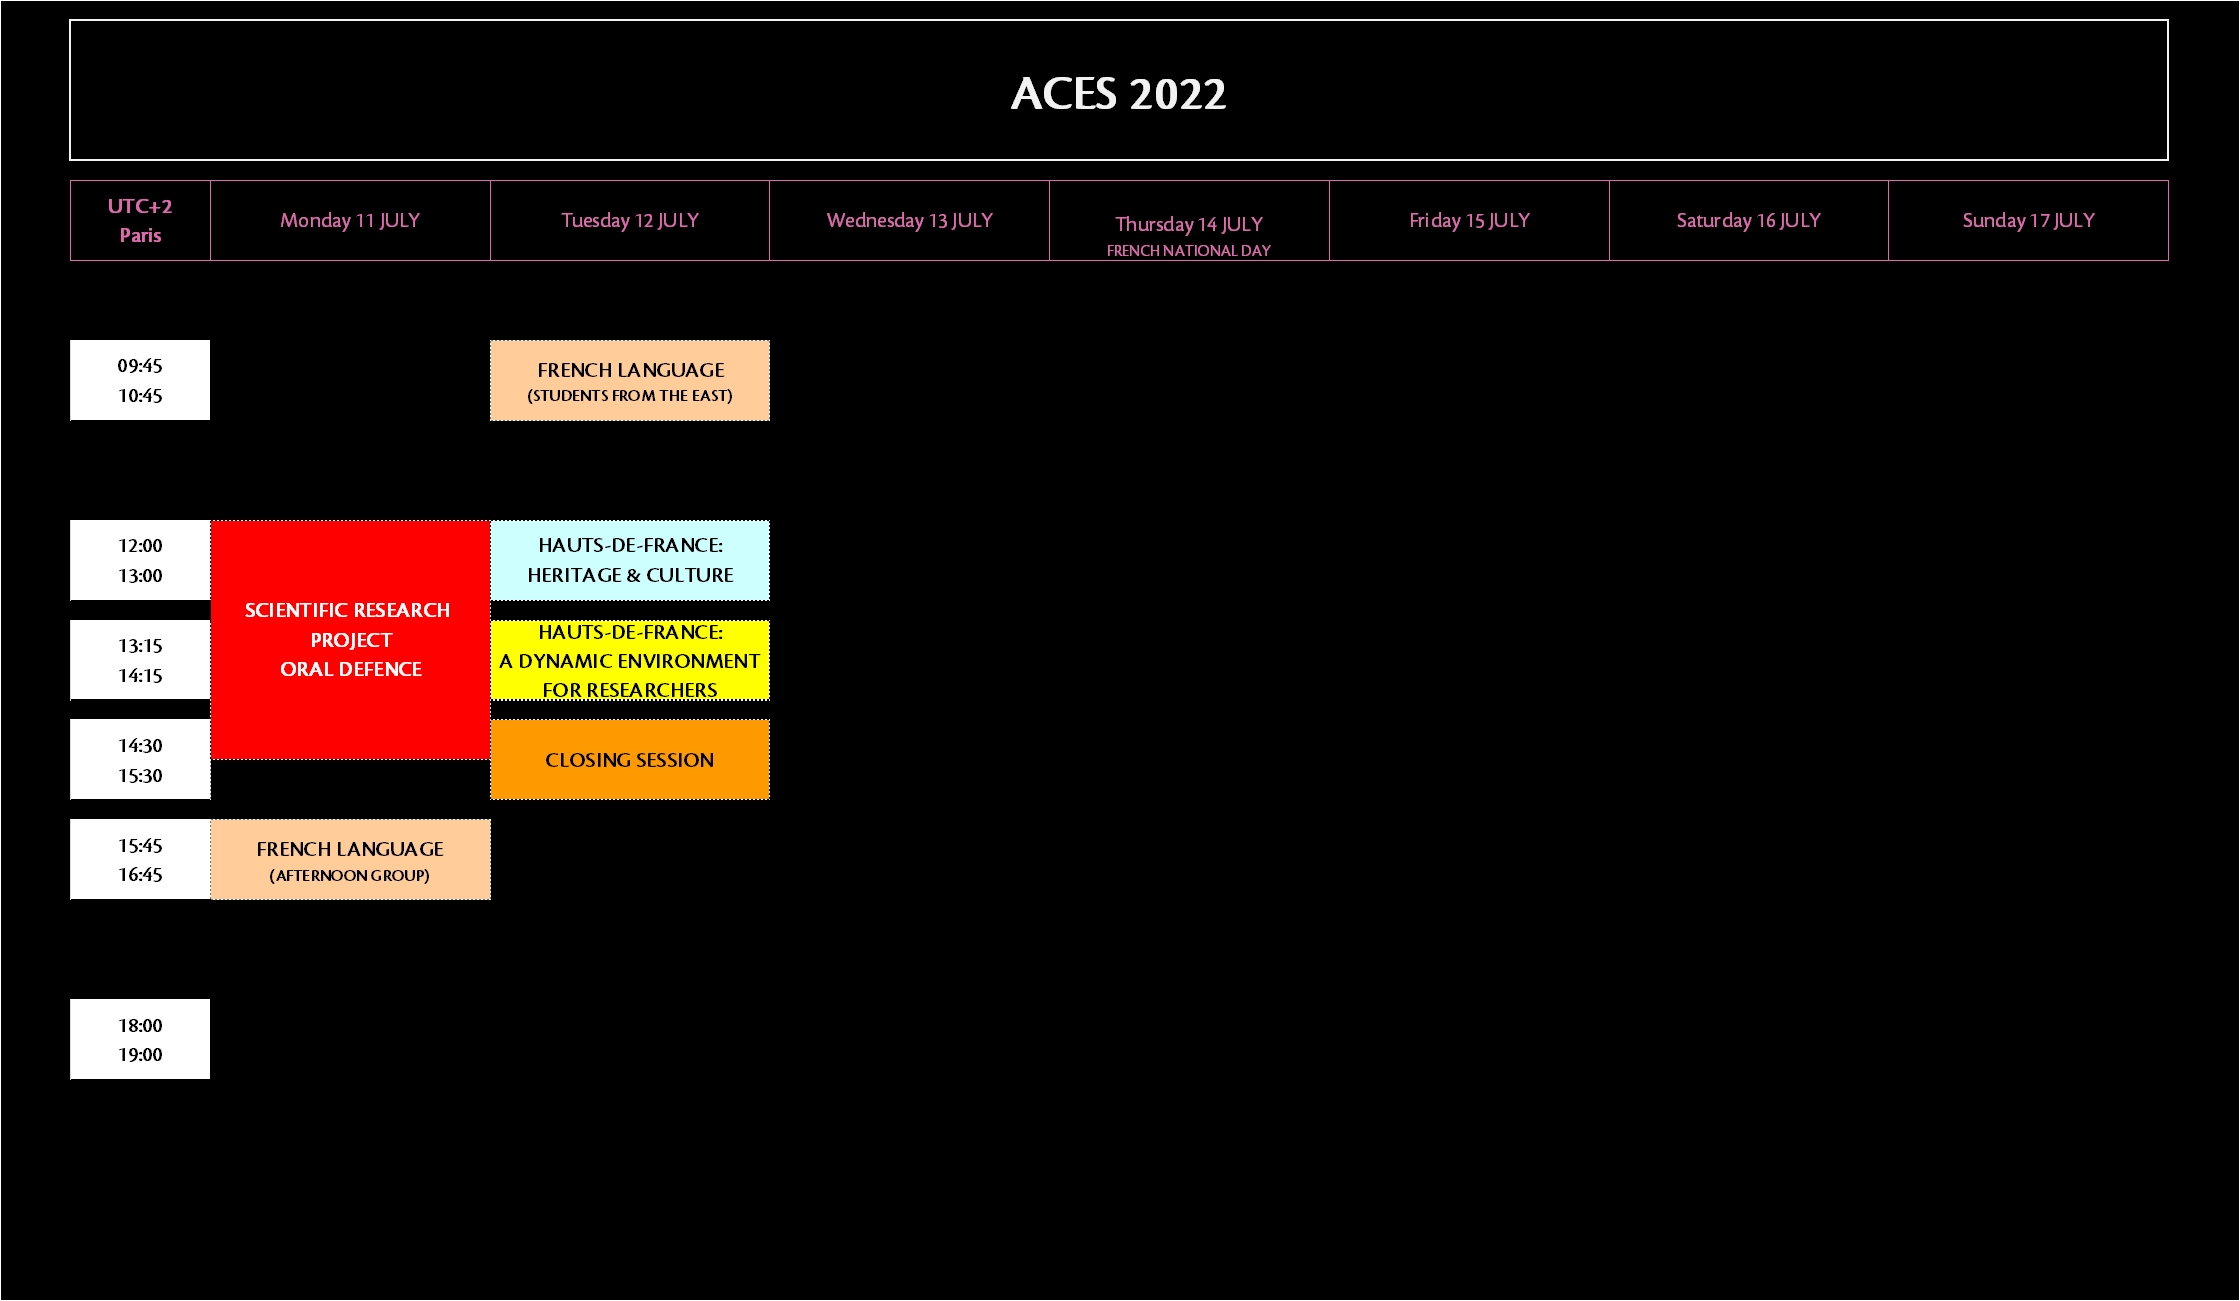 Programme at a Glance ACES2